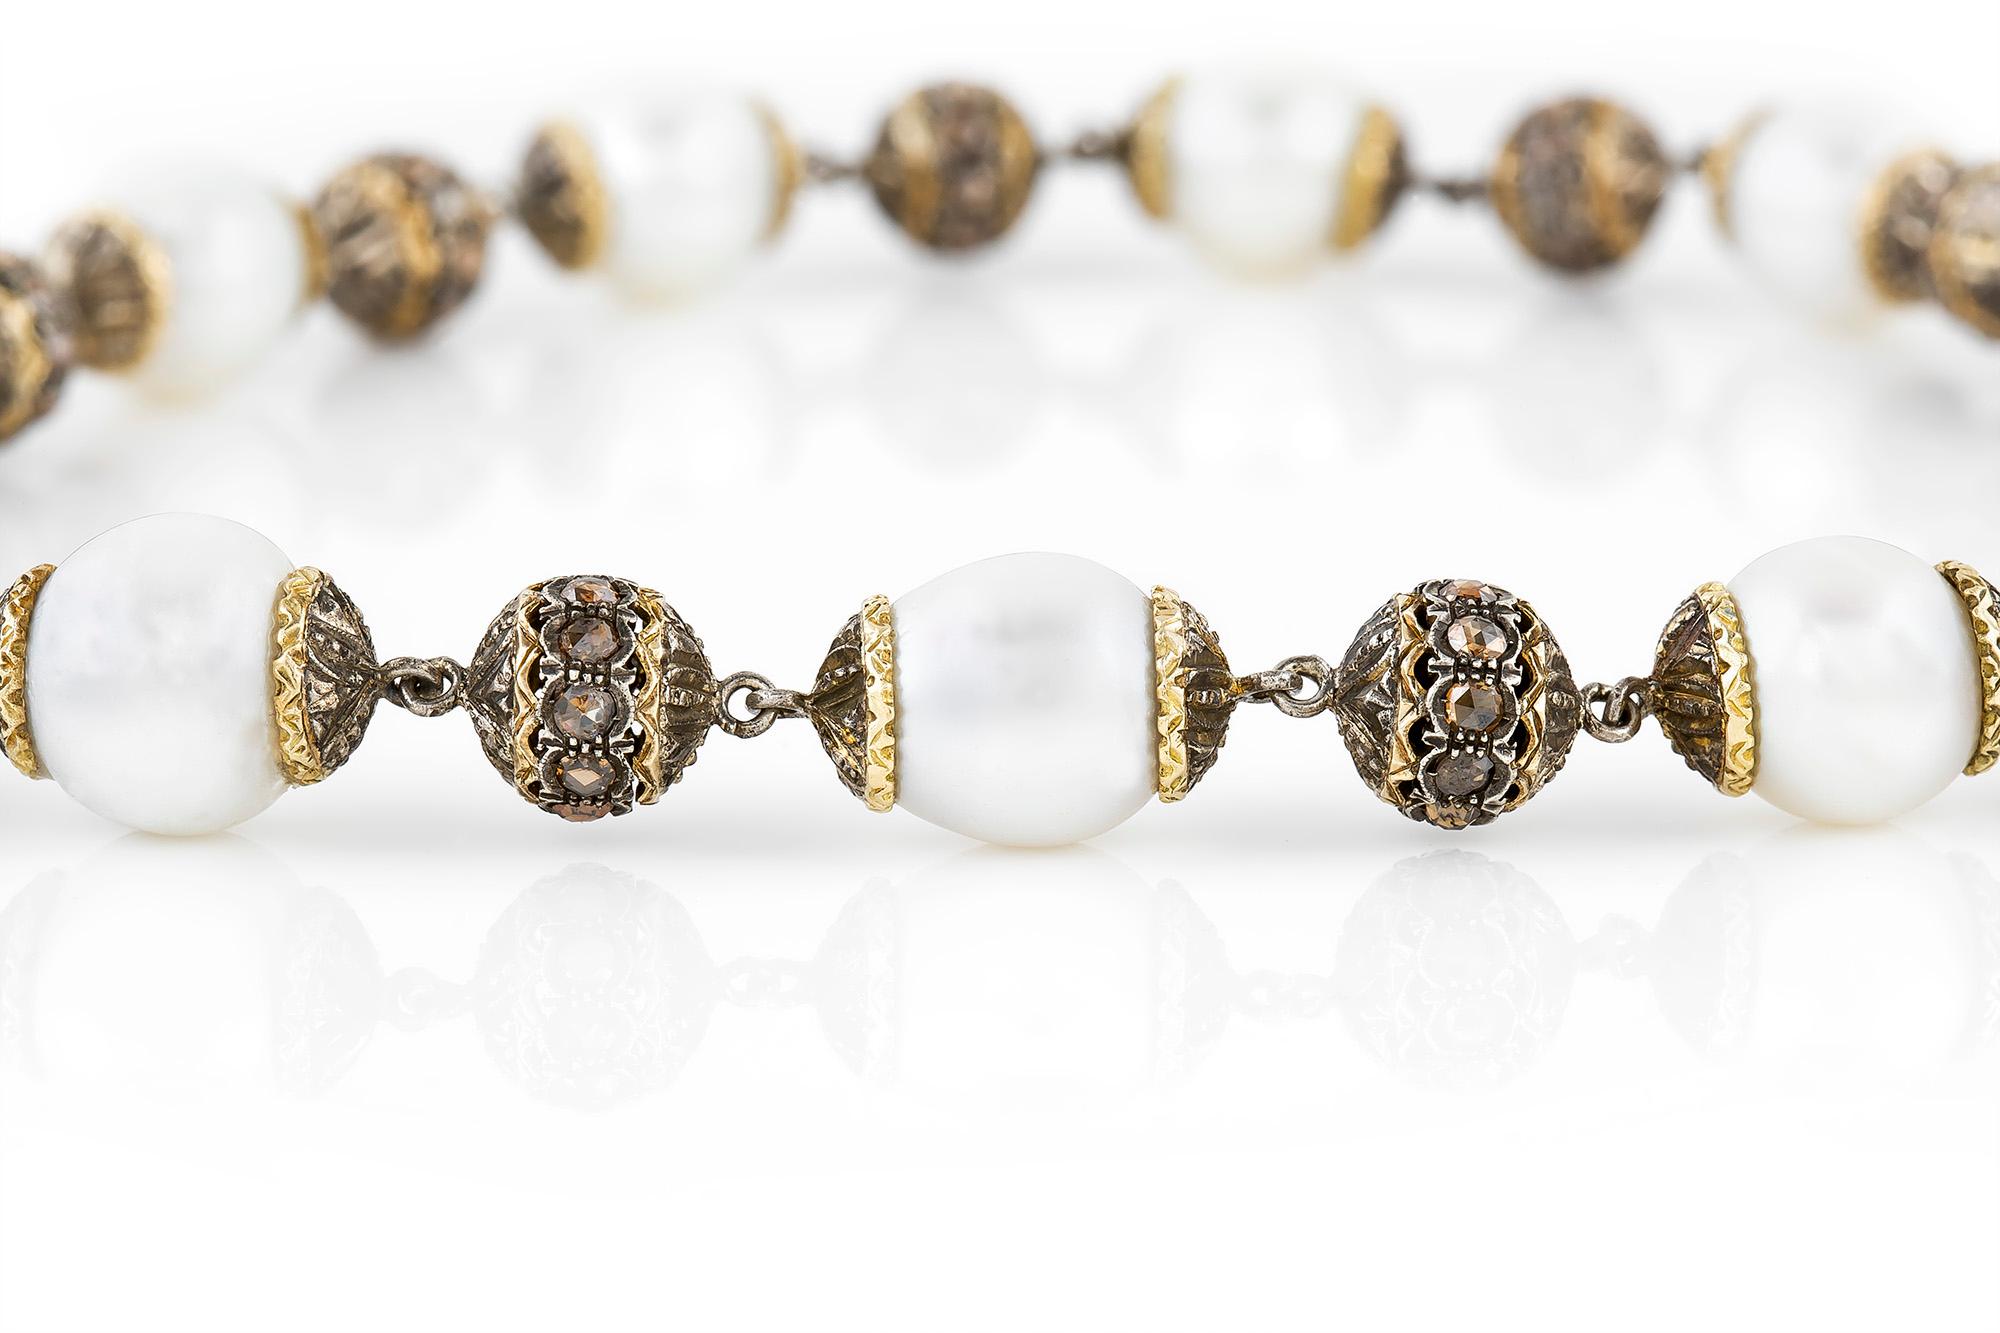 Signed by Buccellati pearl necklace, finely crafted in 18k yellow gold with champagne rose cut diamonds. Circa 1950's.